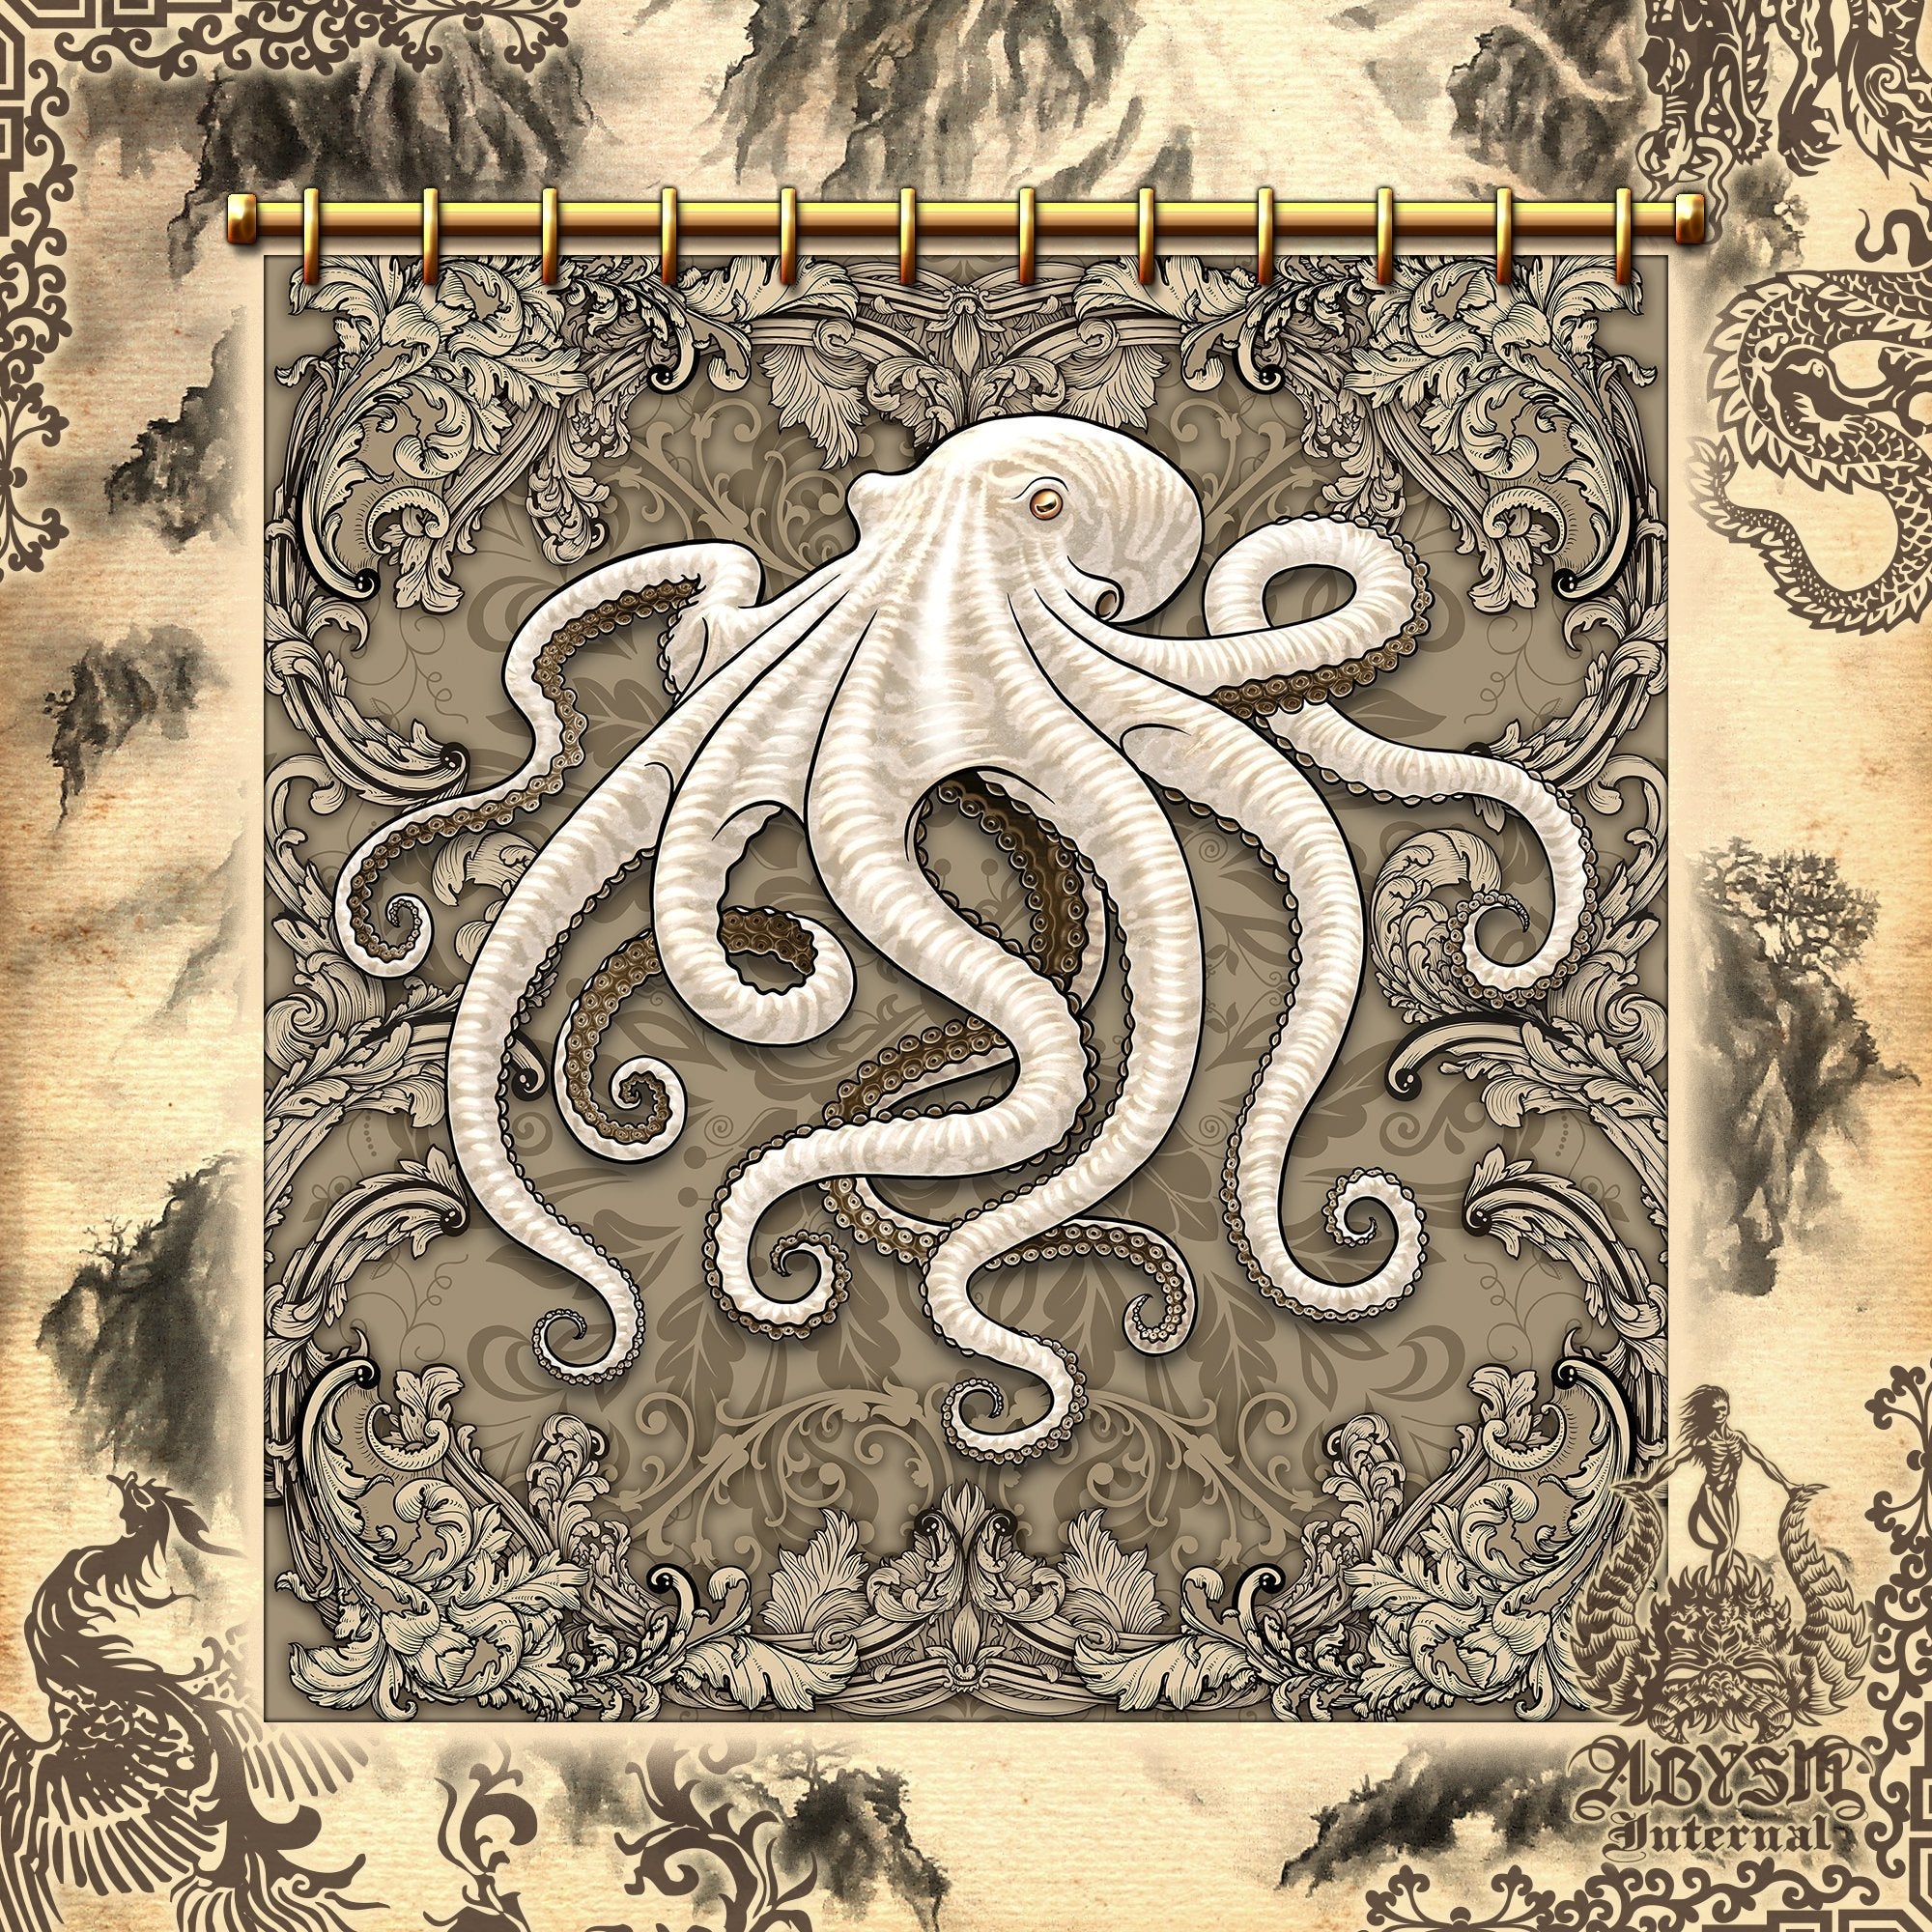 Octopus Shower Curtain, Coastal Bathroom Decor, Eclectic and Funky Home - Cream & White - Abysm Internal